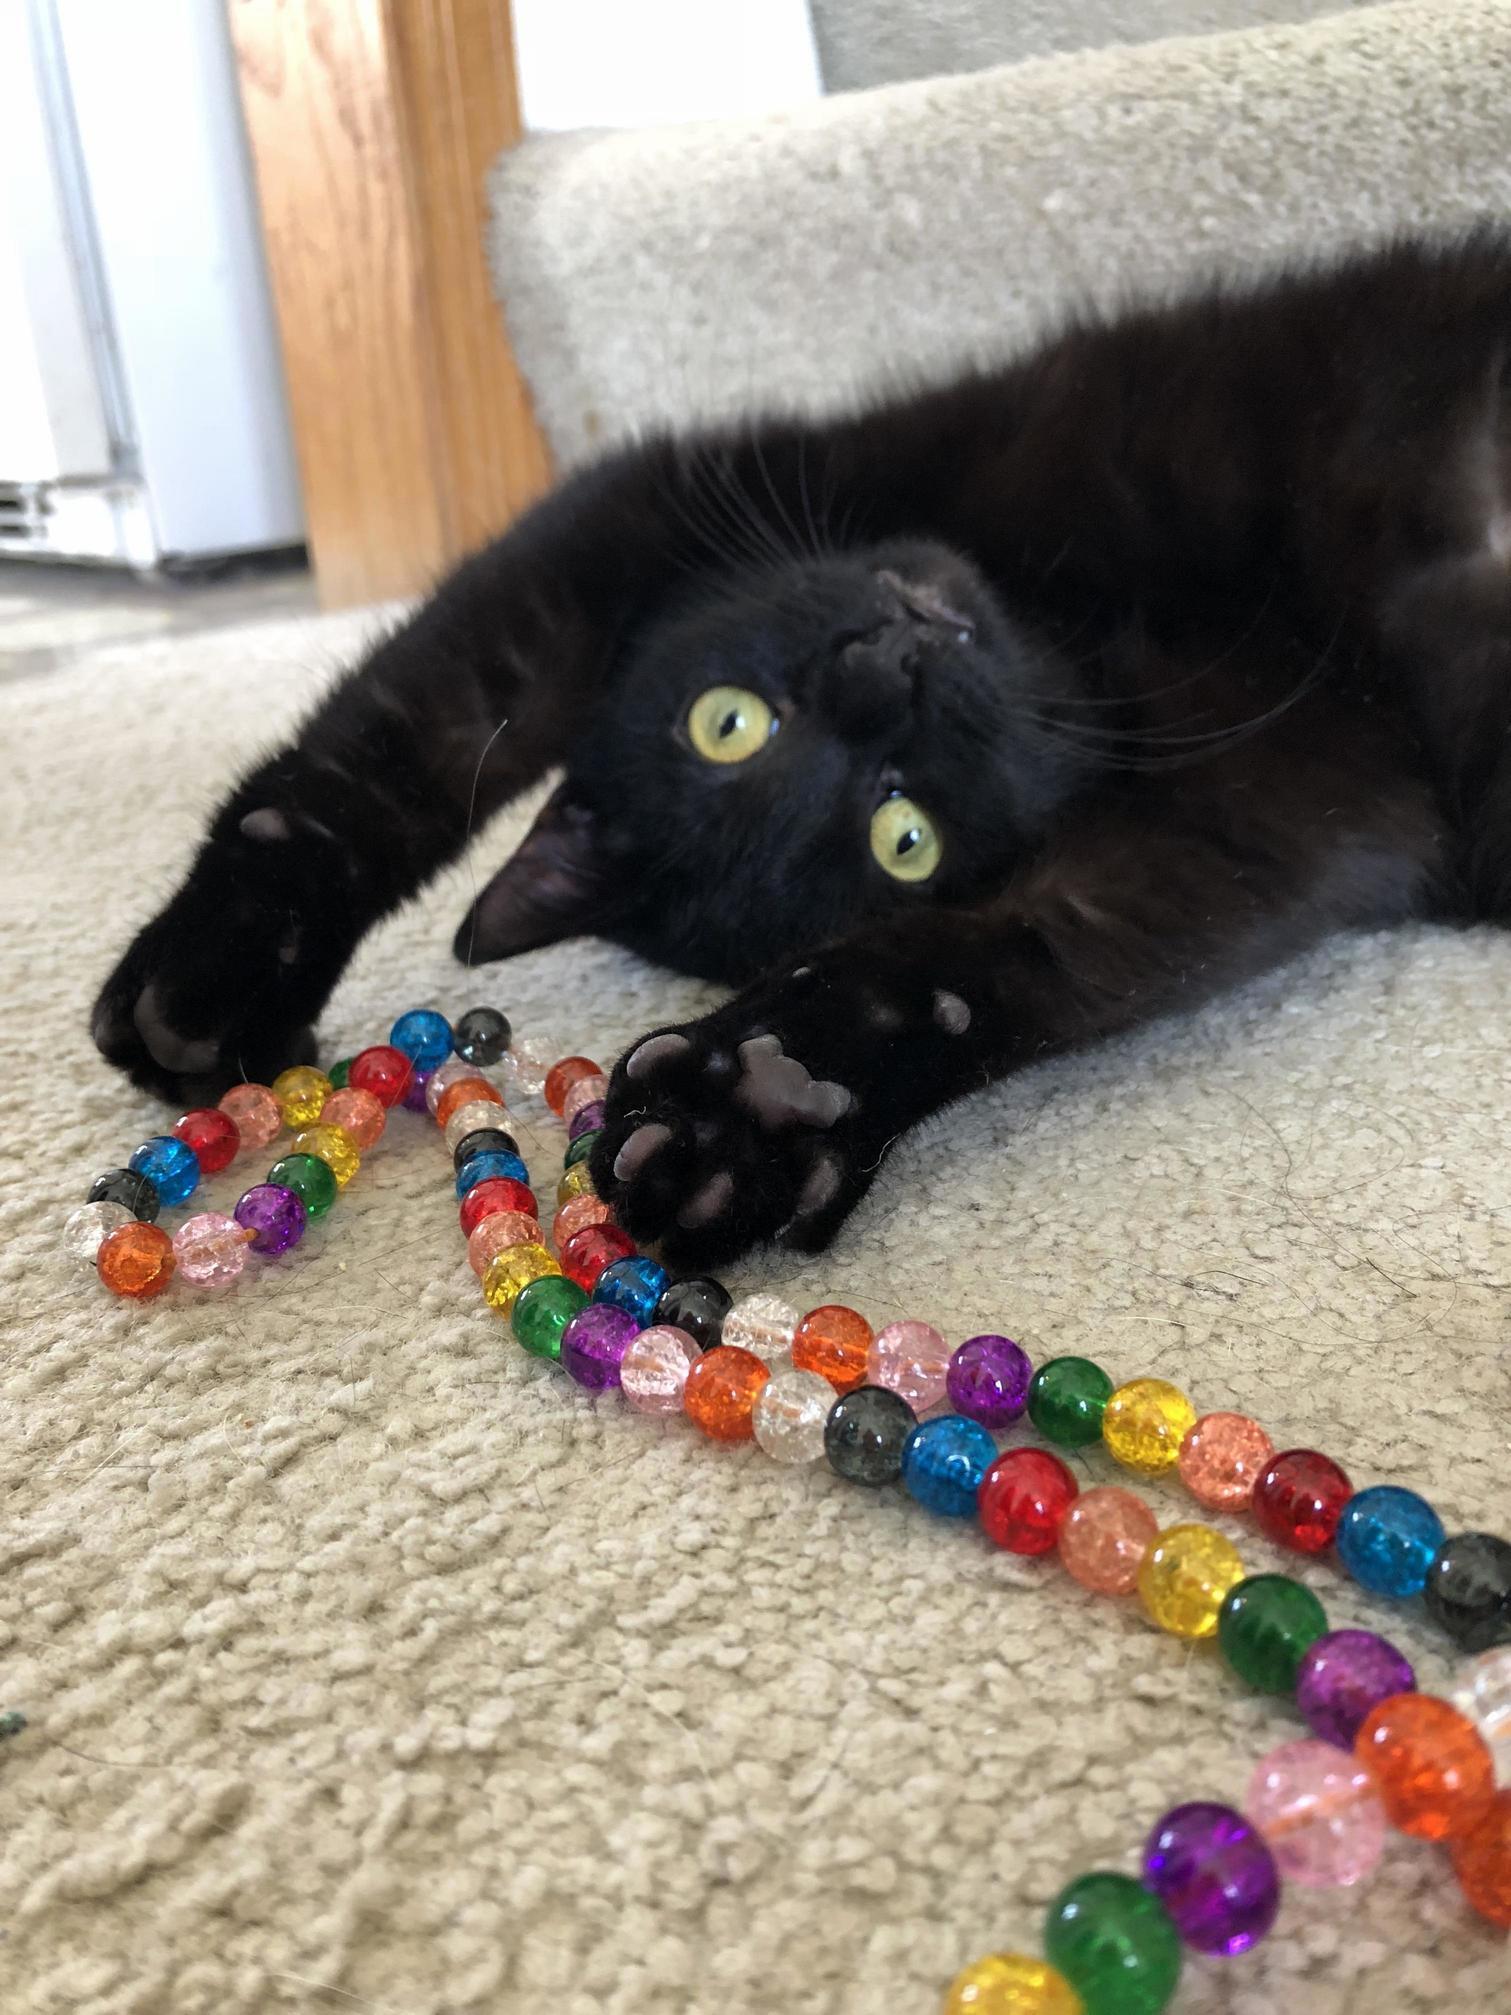 She stole my string of beads, then tried to play innocent and cute